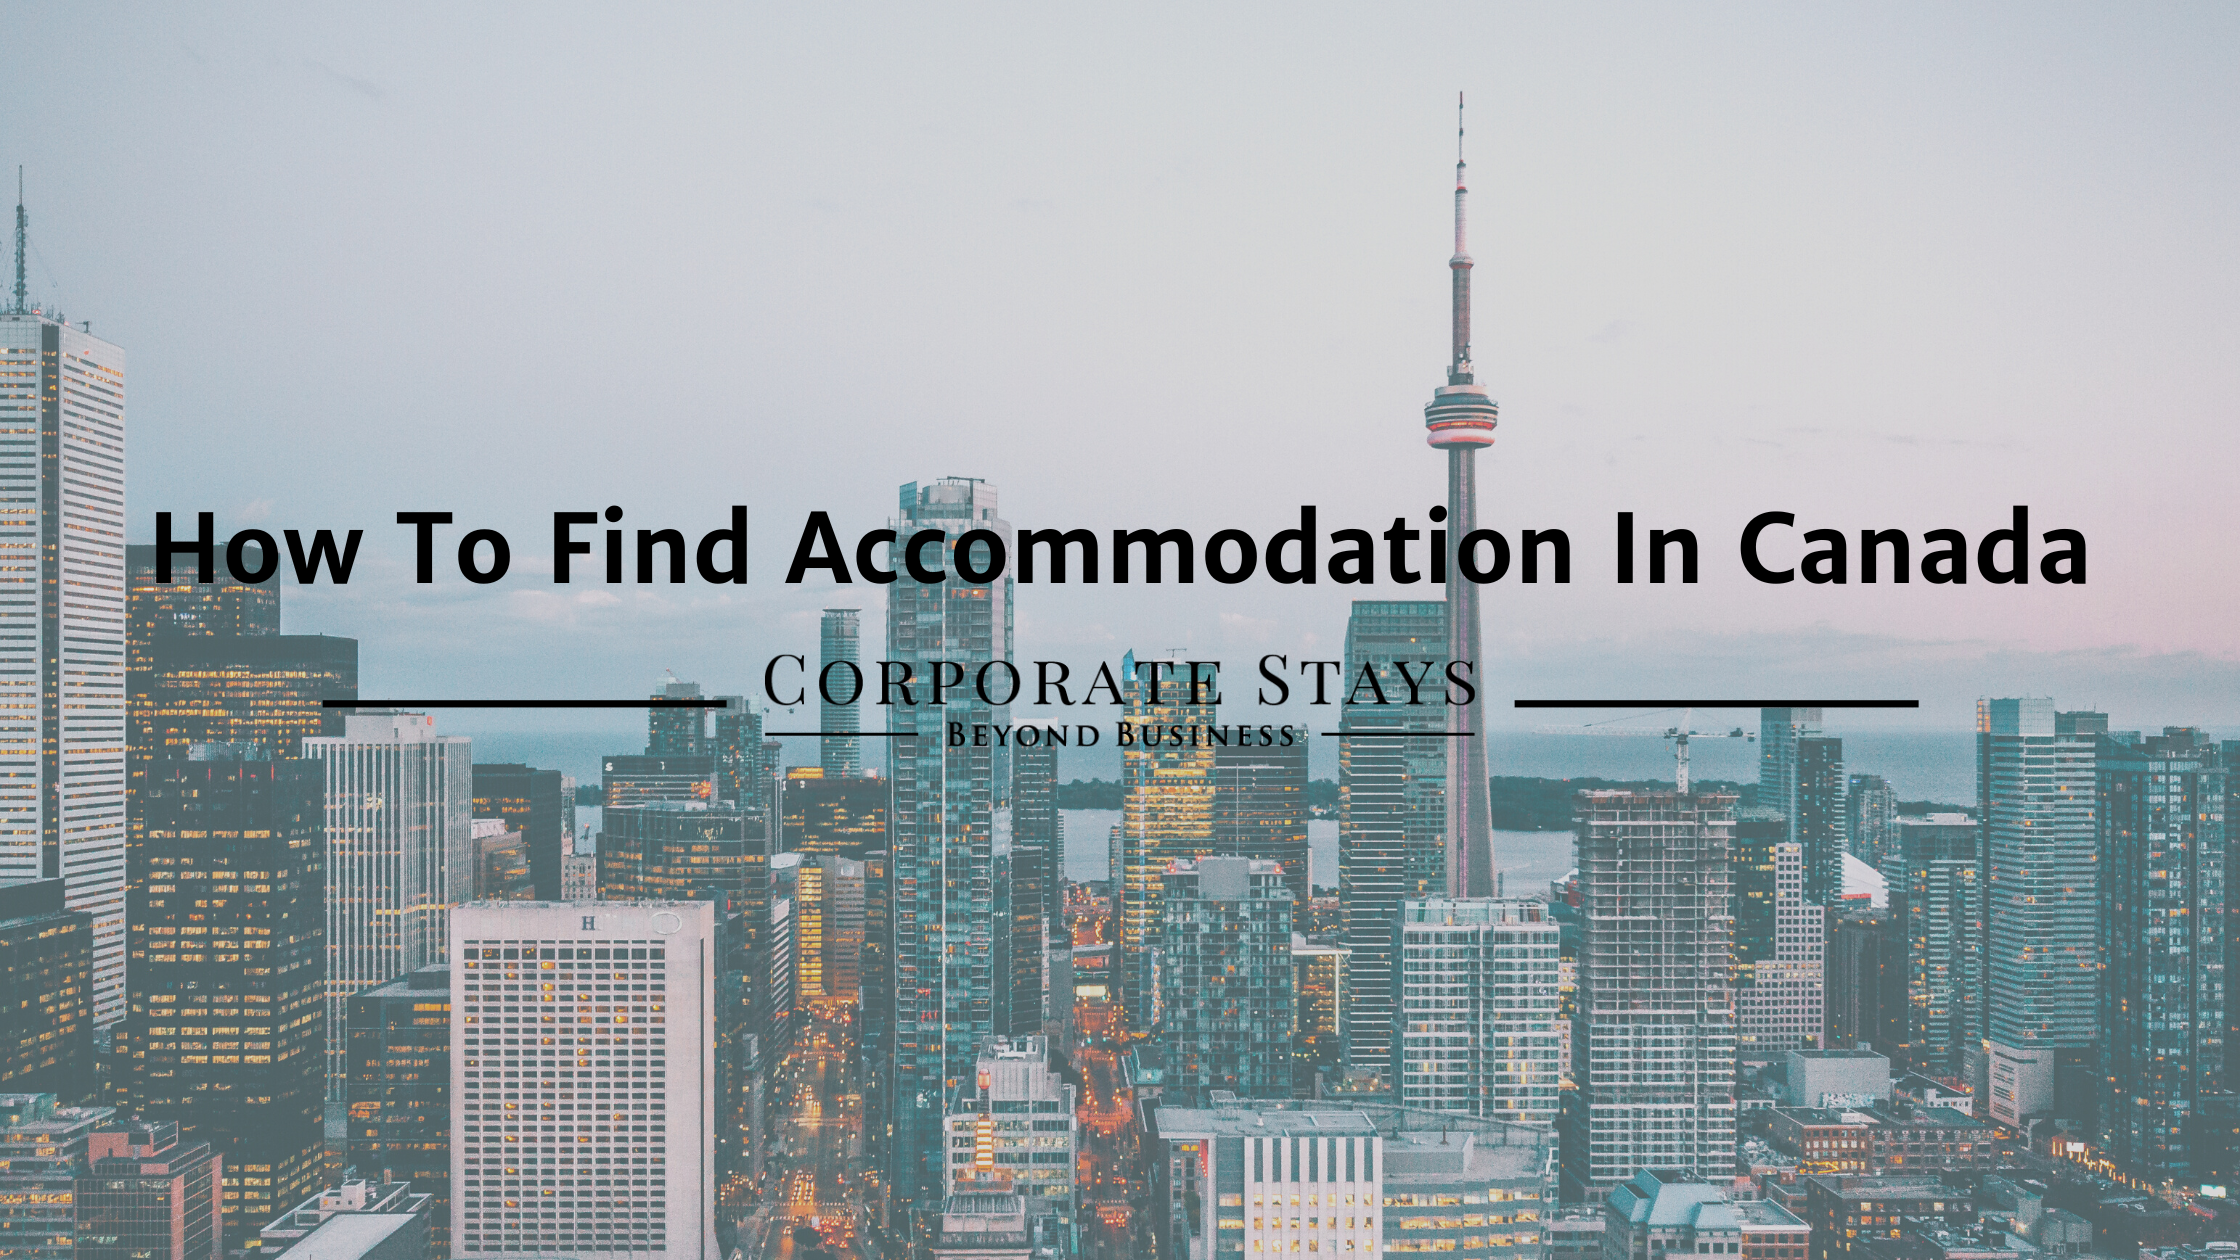 Accommodation in Canada